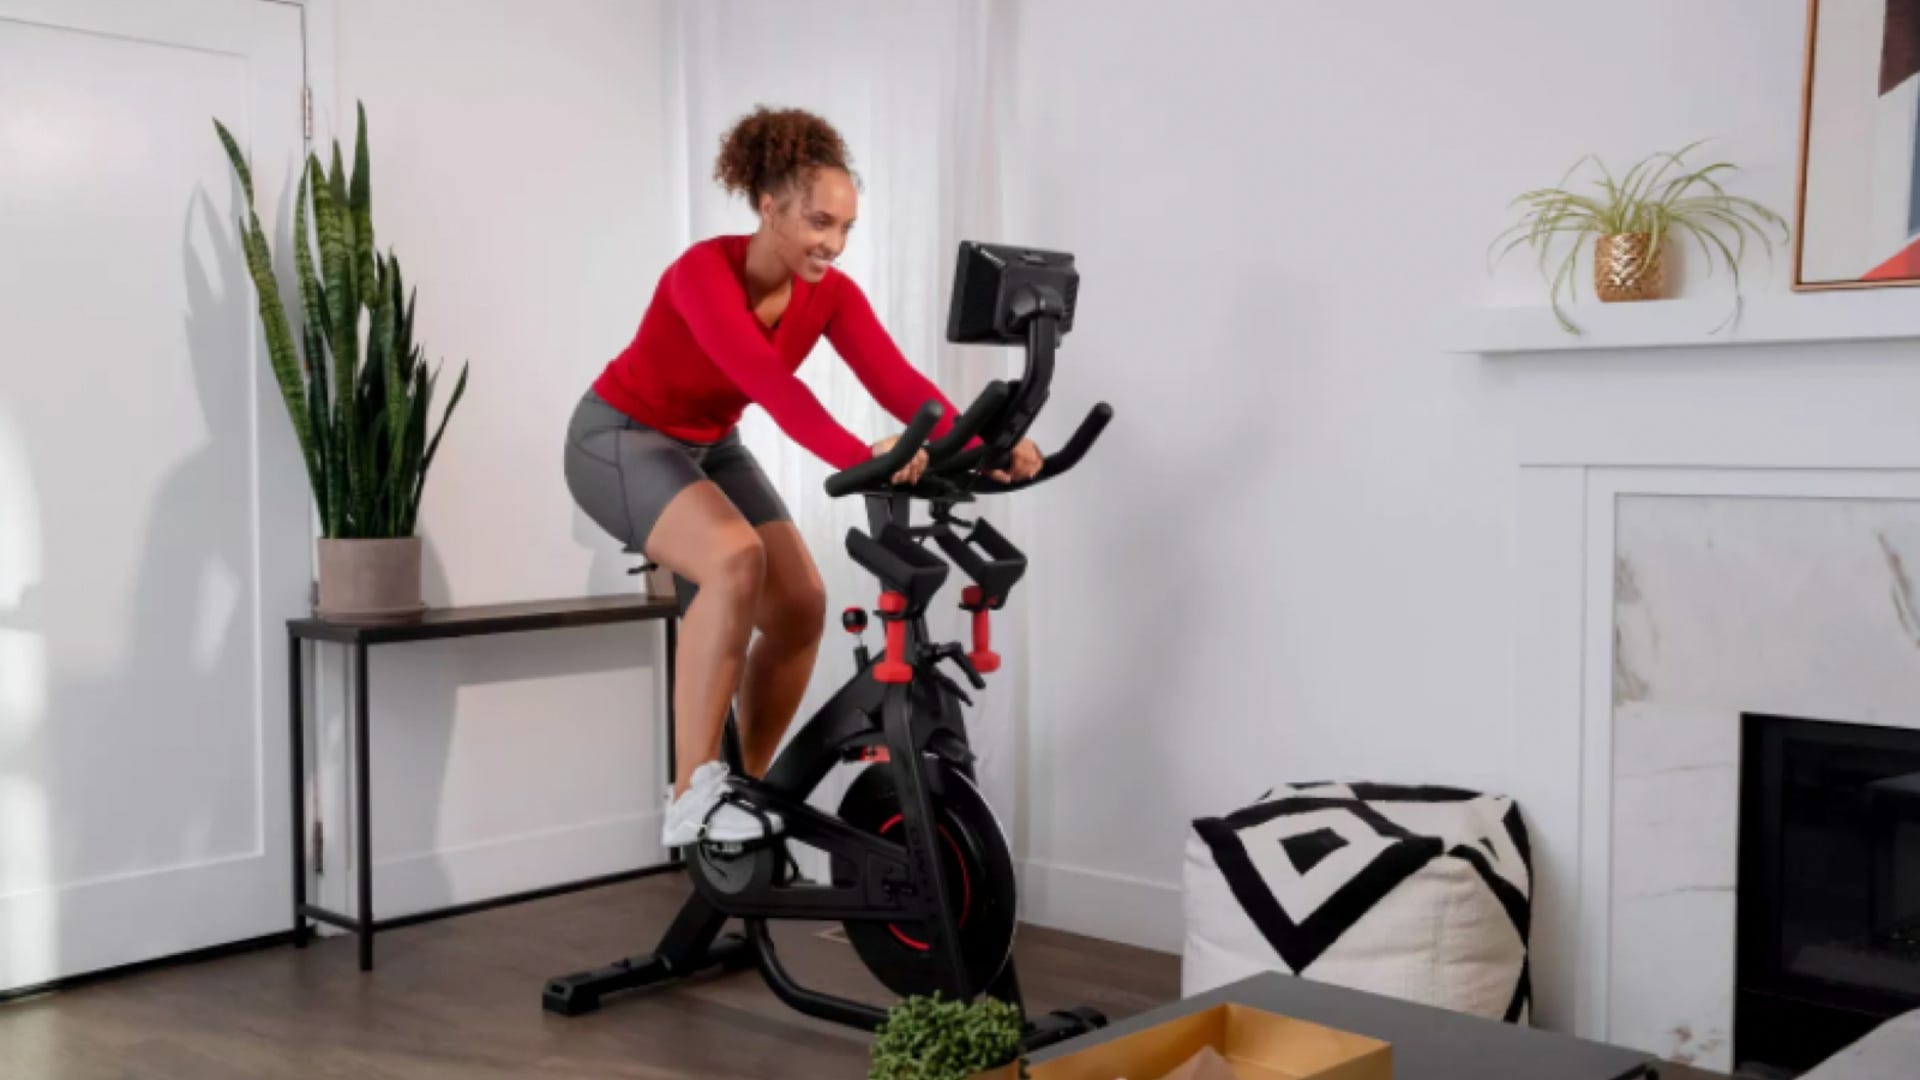 A woman riding the Bowflex C7 exercise bike in her living room.